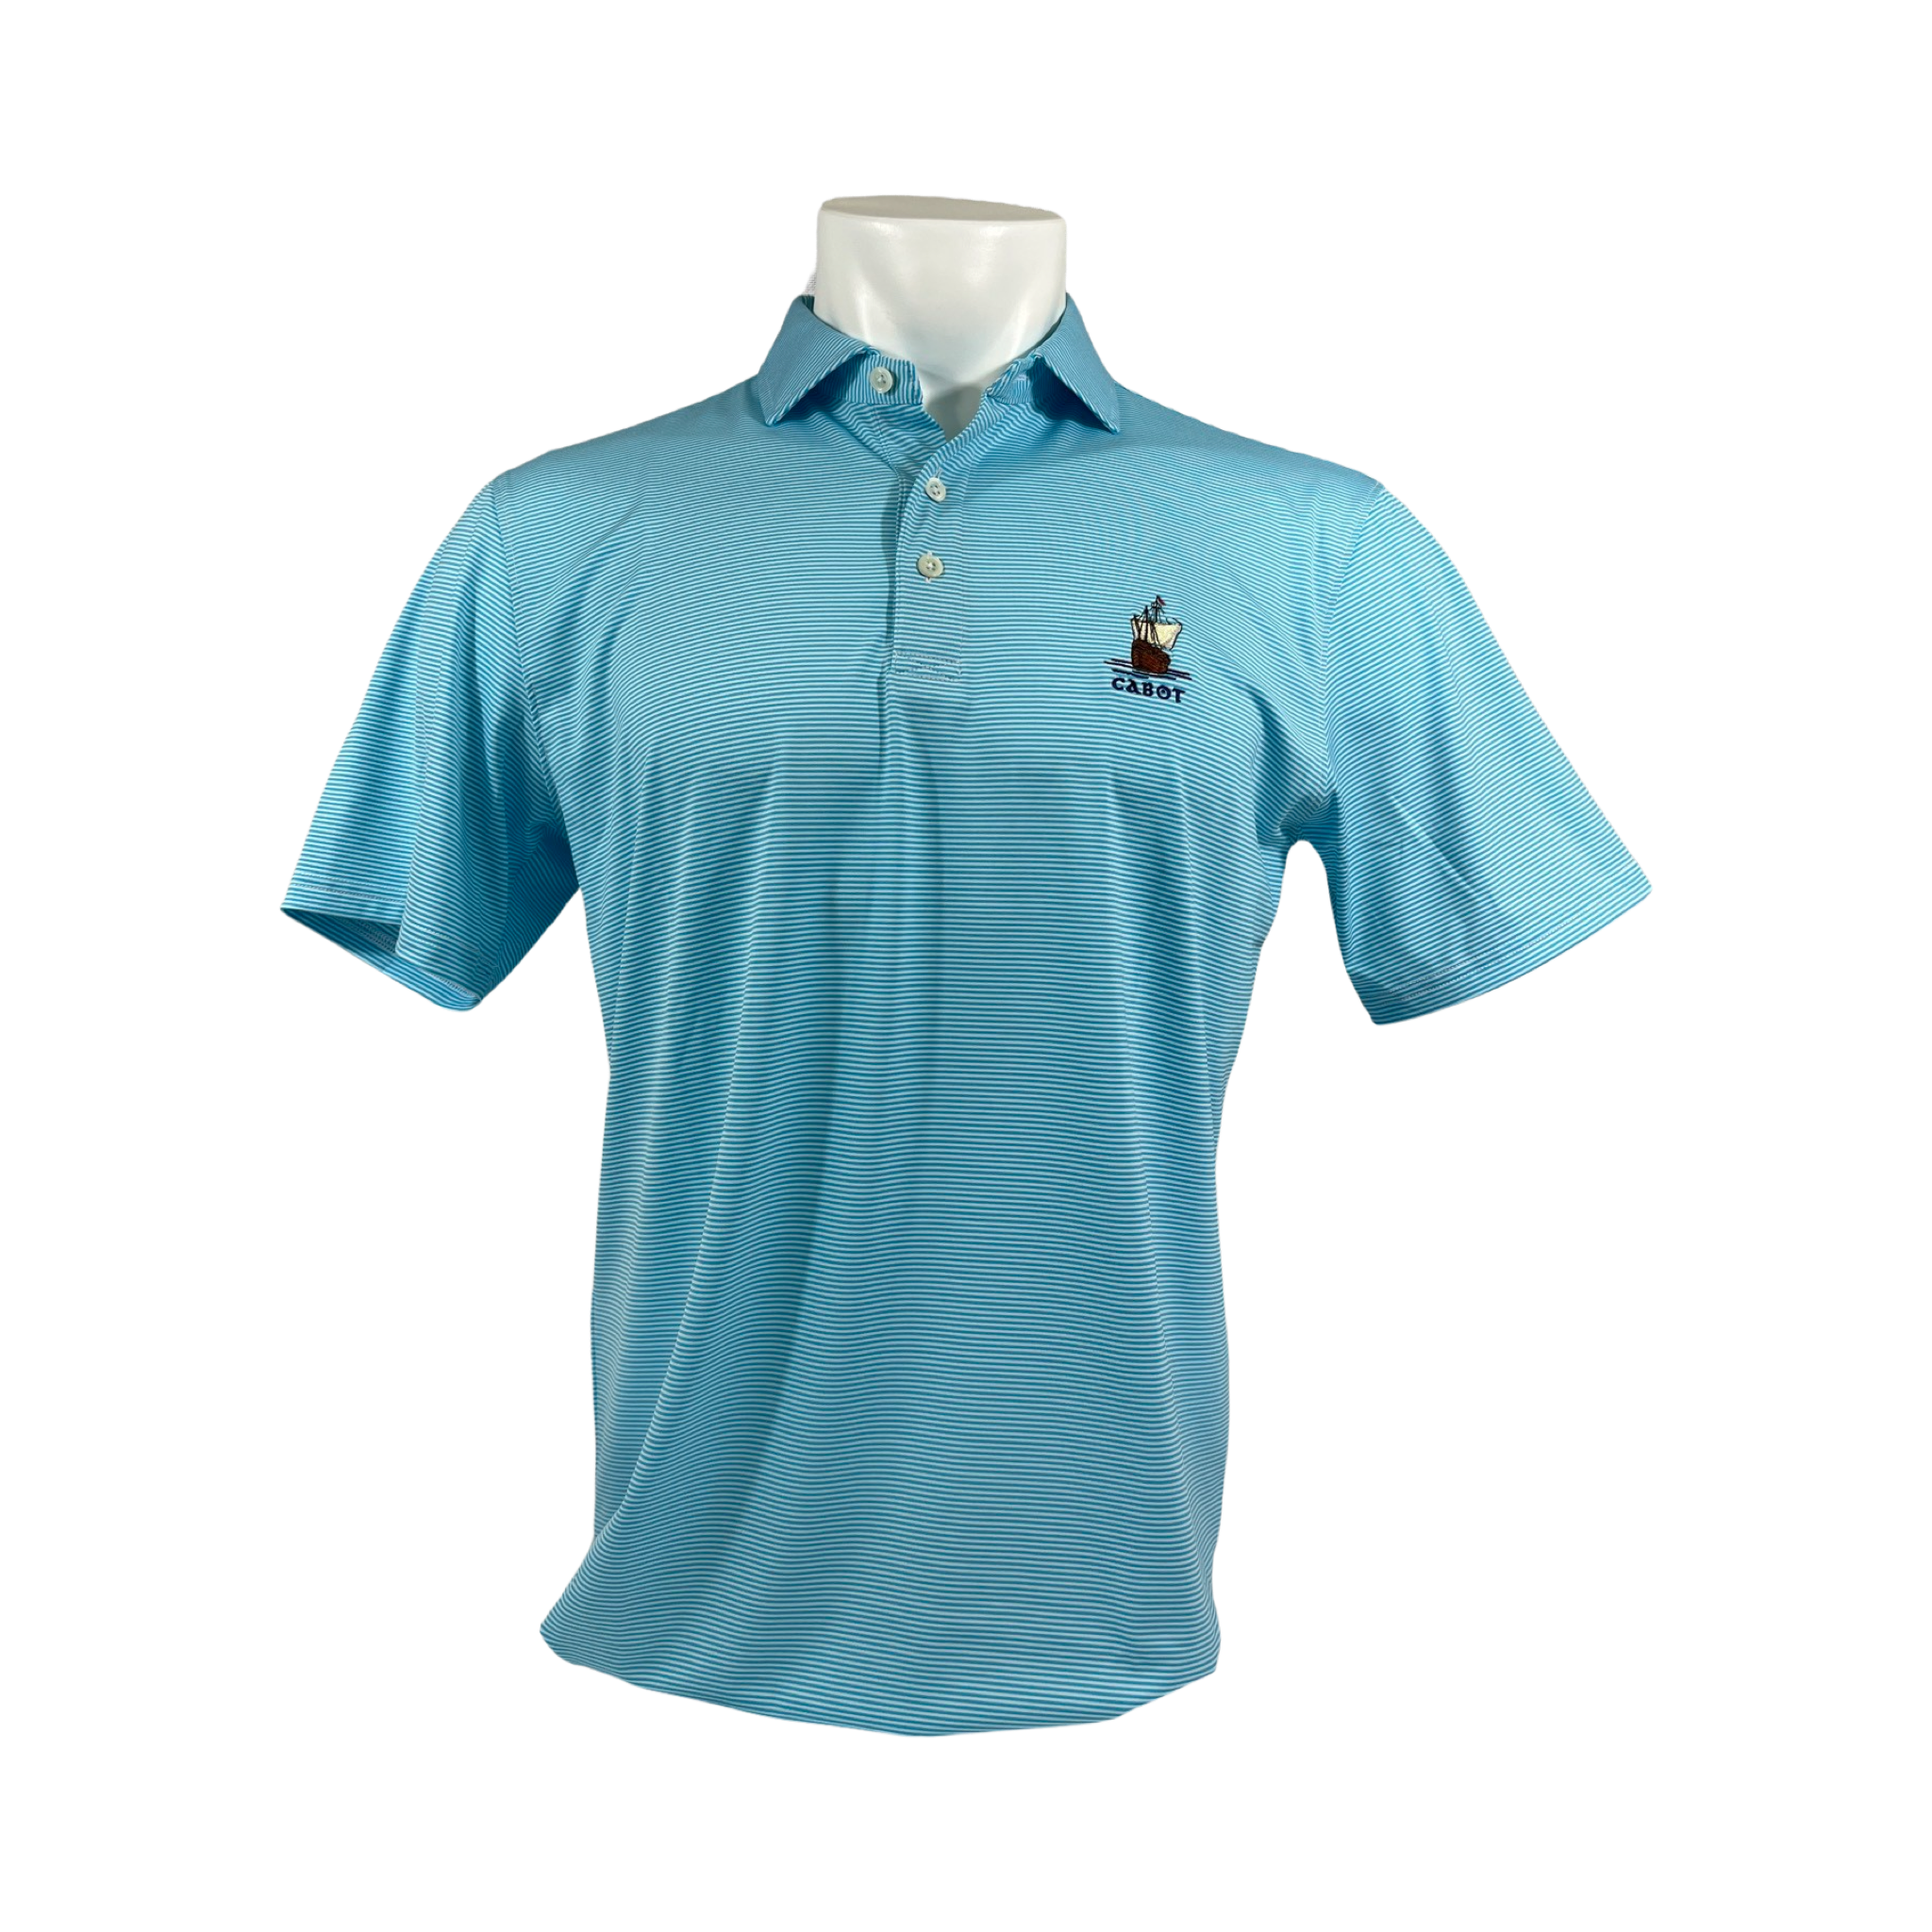 Holderness & Bourne Cabot Links 'The Perkins' Polo